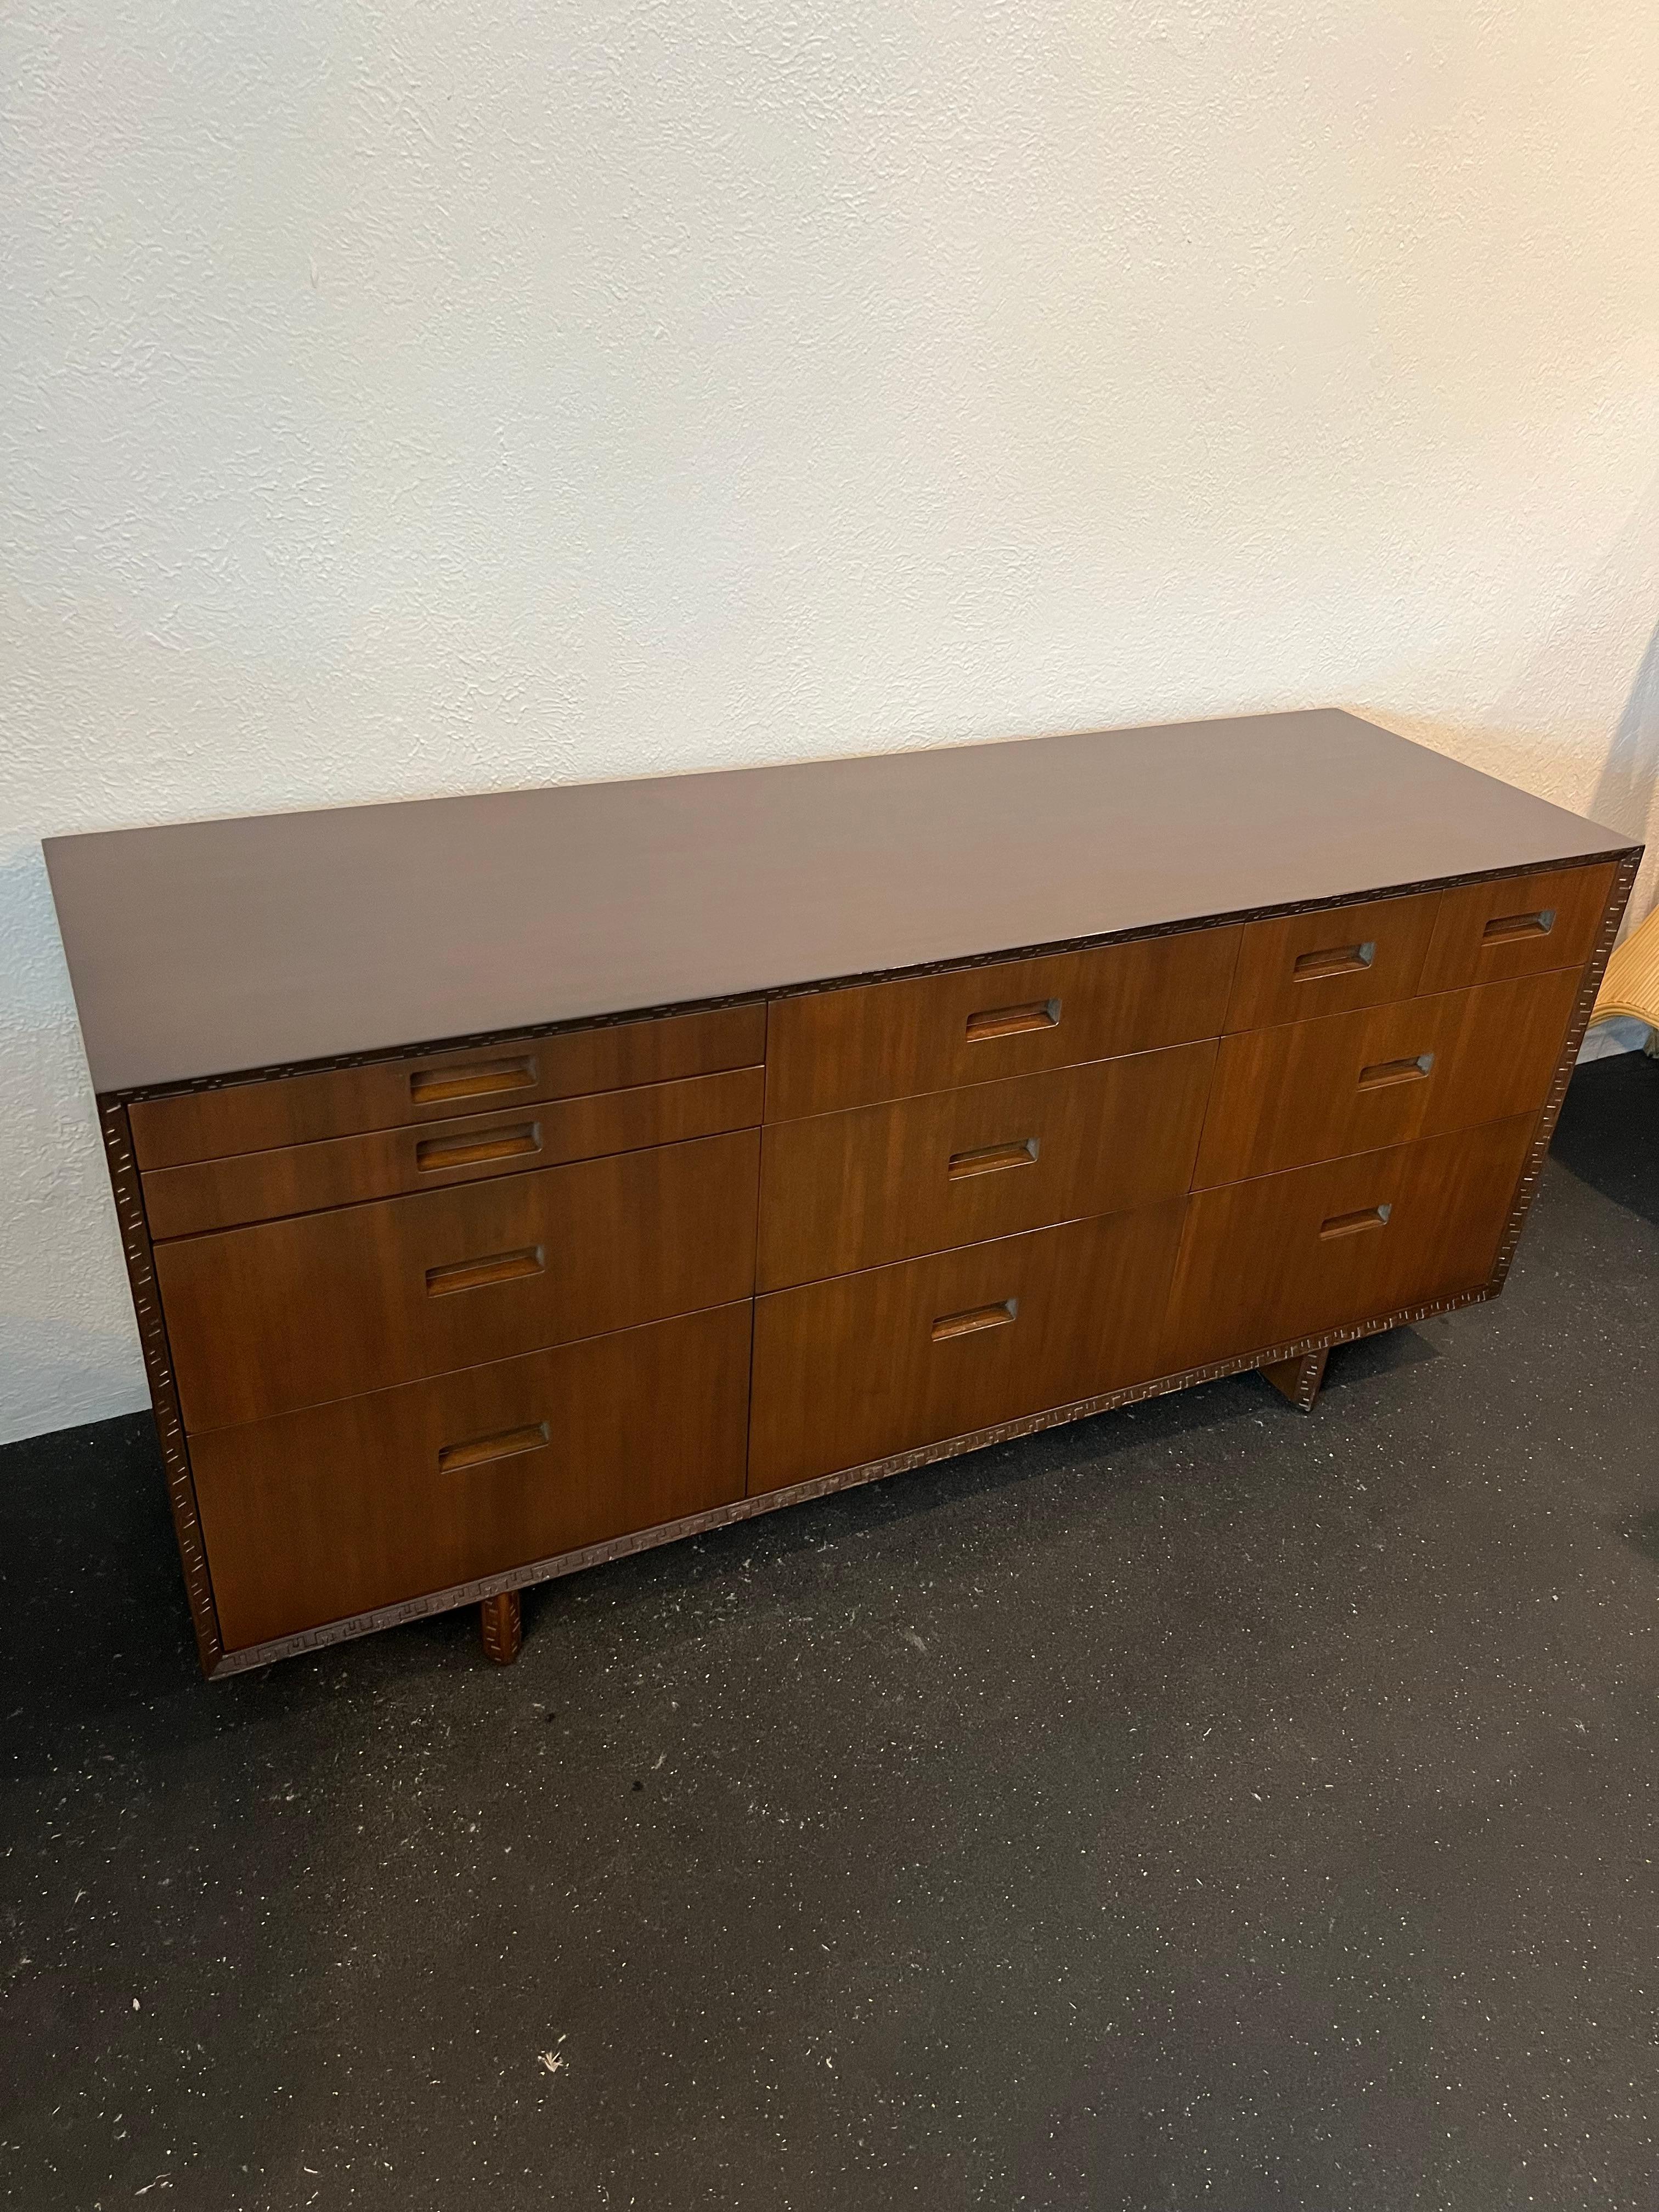 Frank Lloyd Wright for Heritage Henredon “Taliesin” dresser. Recently refinished. Additional photos available upon request. Matching side table, pair of chest and mirror also available separately.

Would work well in a variety of interiors such as